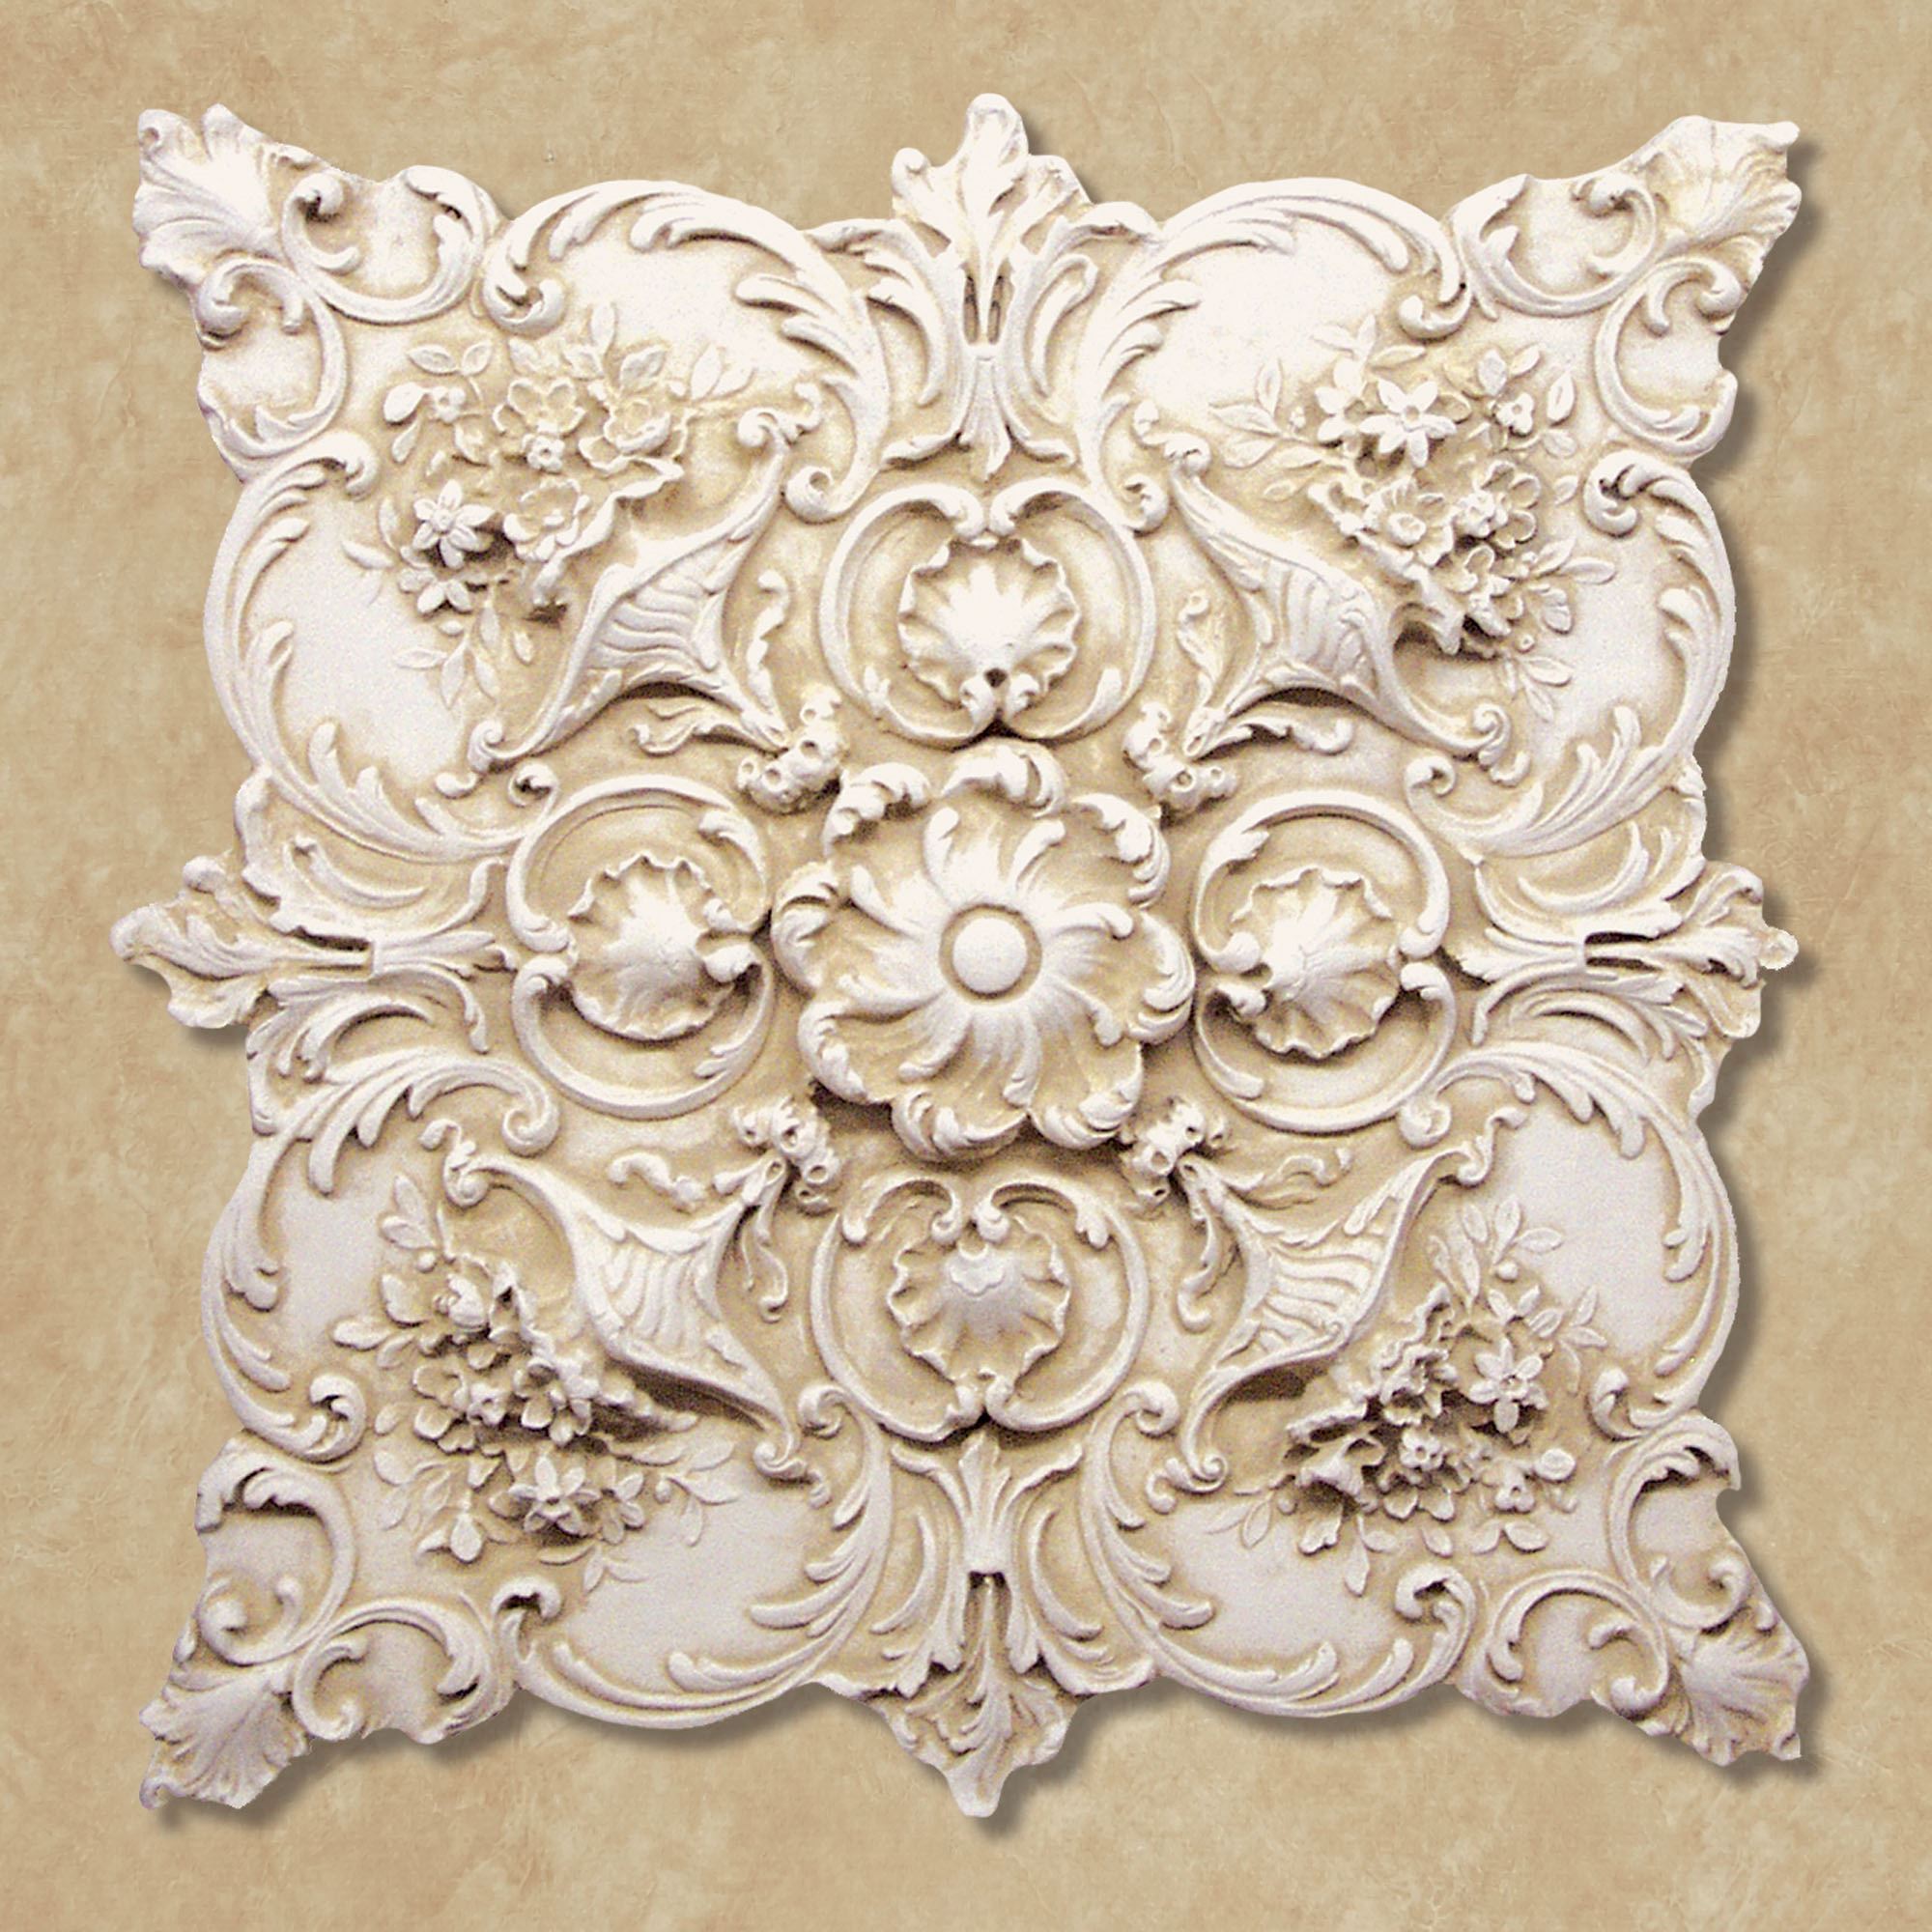 Fiorenza Wall Plaque Antique Ivory. Touch to zoom